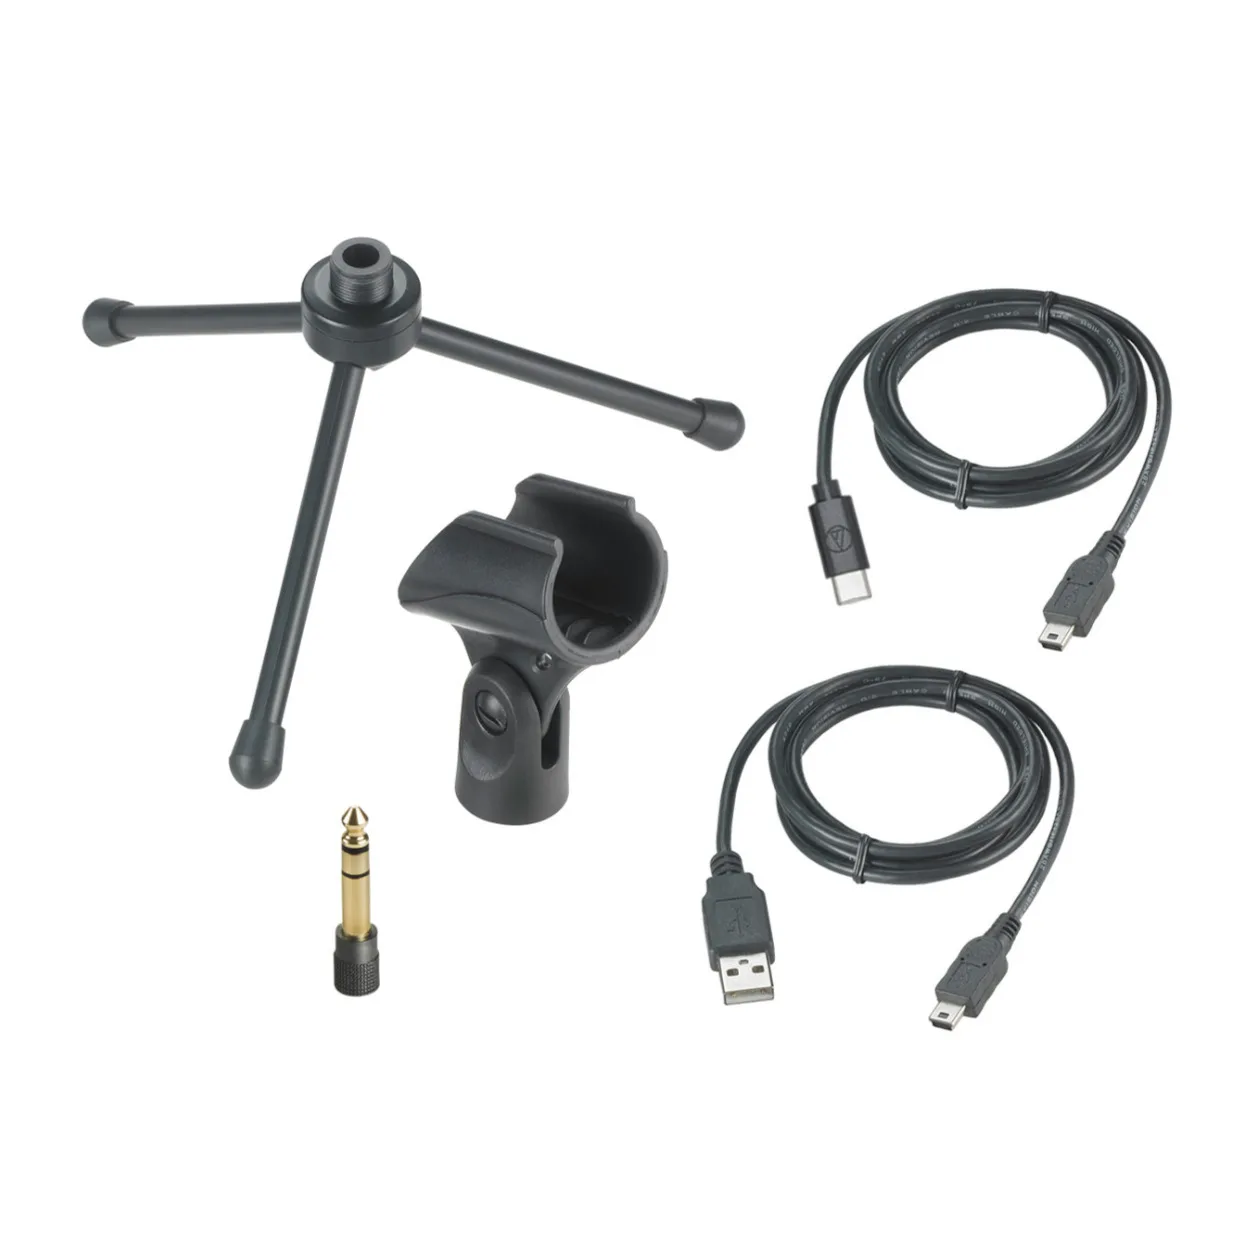 Audio Technica AT2005USB USB/XLR Microphone and ATH-M20X Professional Headphones enlarge